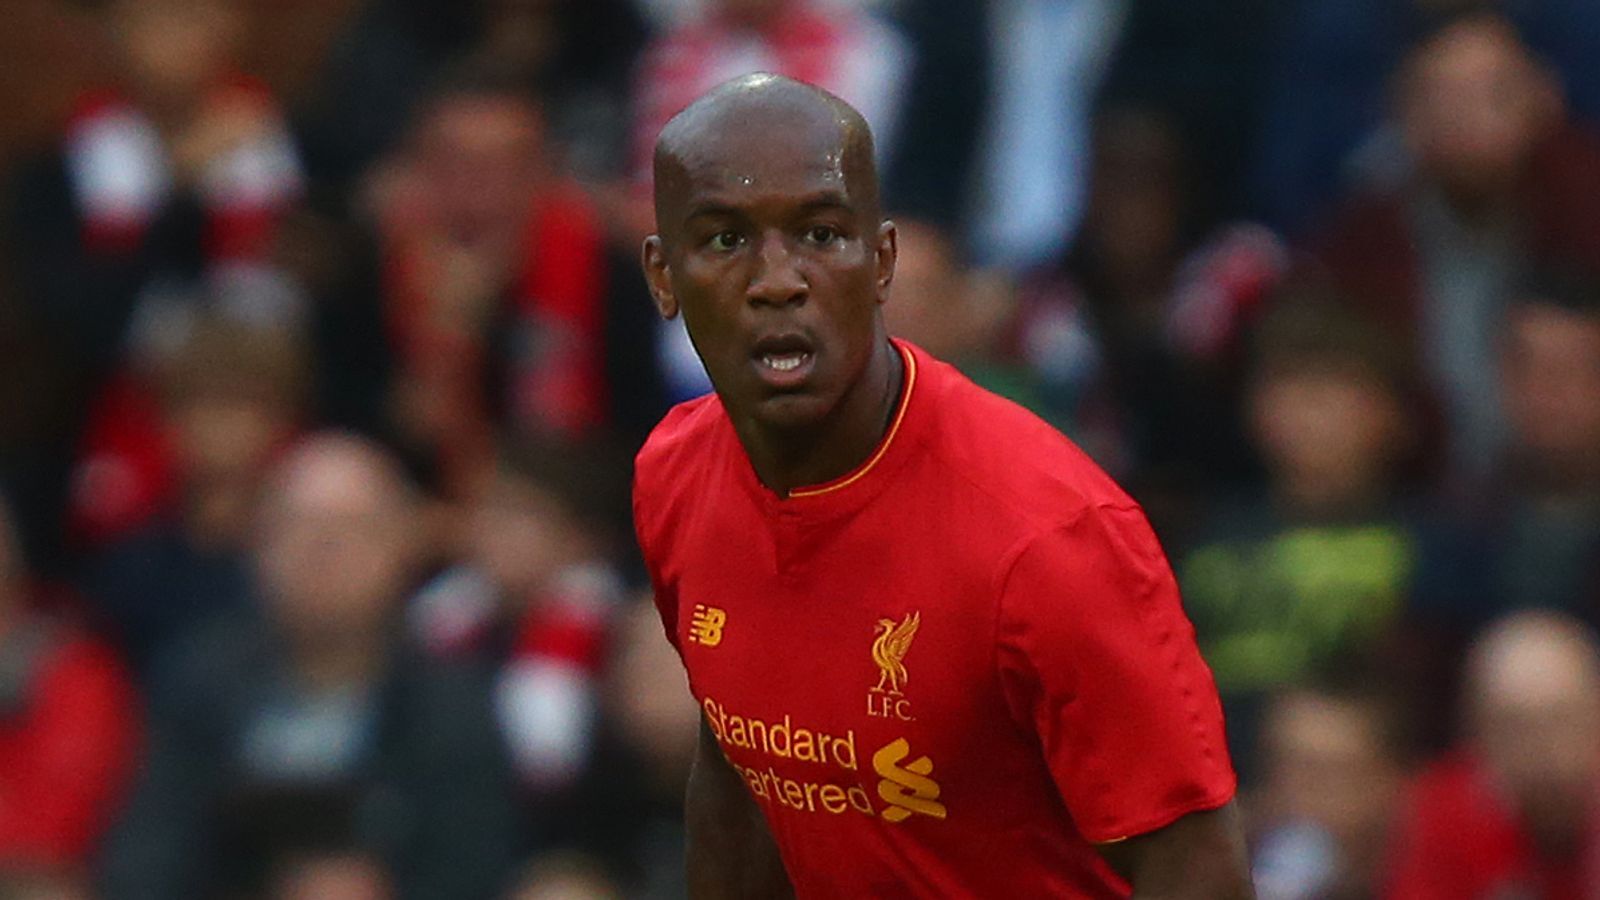 Andre Wisdom Stabbed and Robbed in a Mugging Incident